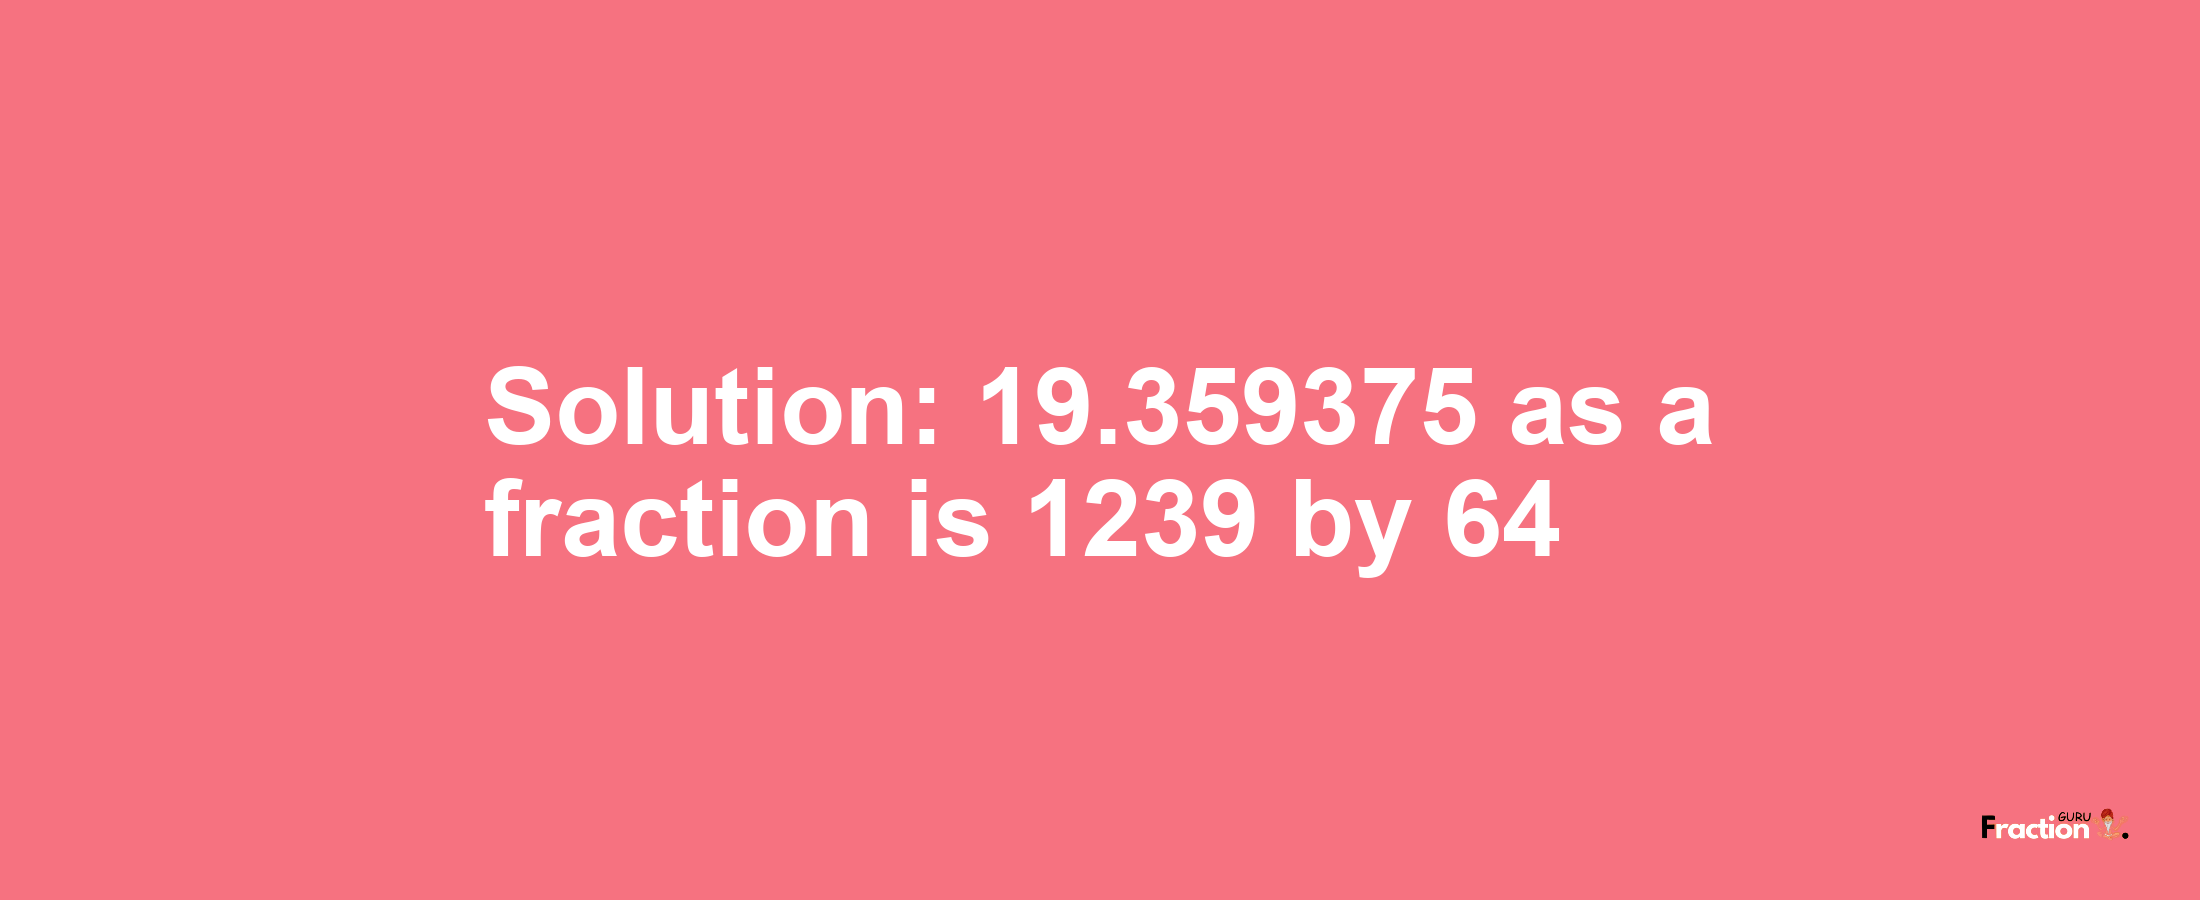 Solution:19.359375 as a fraction is 1239/64